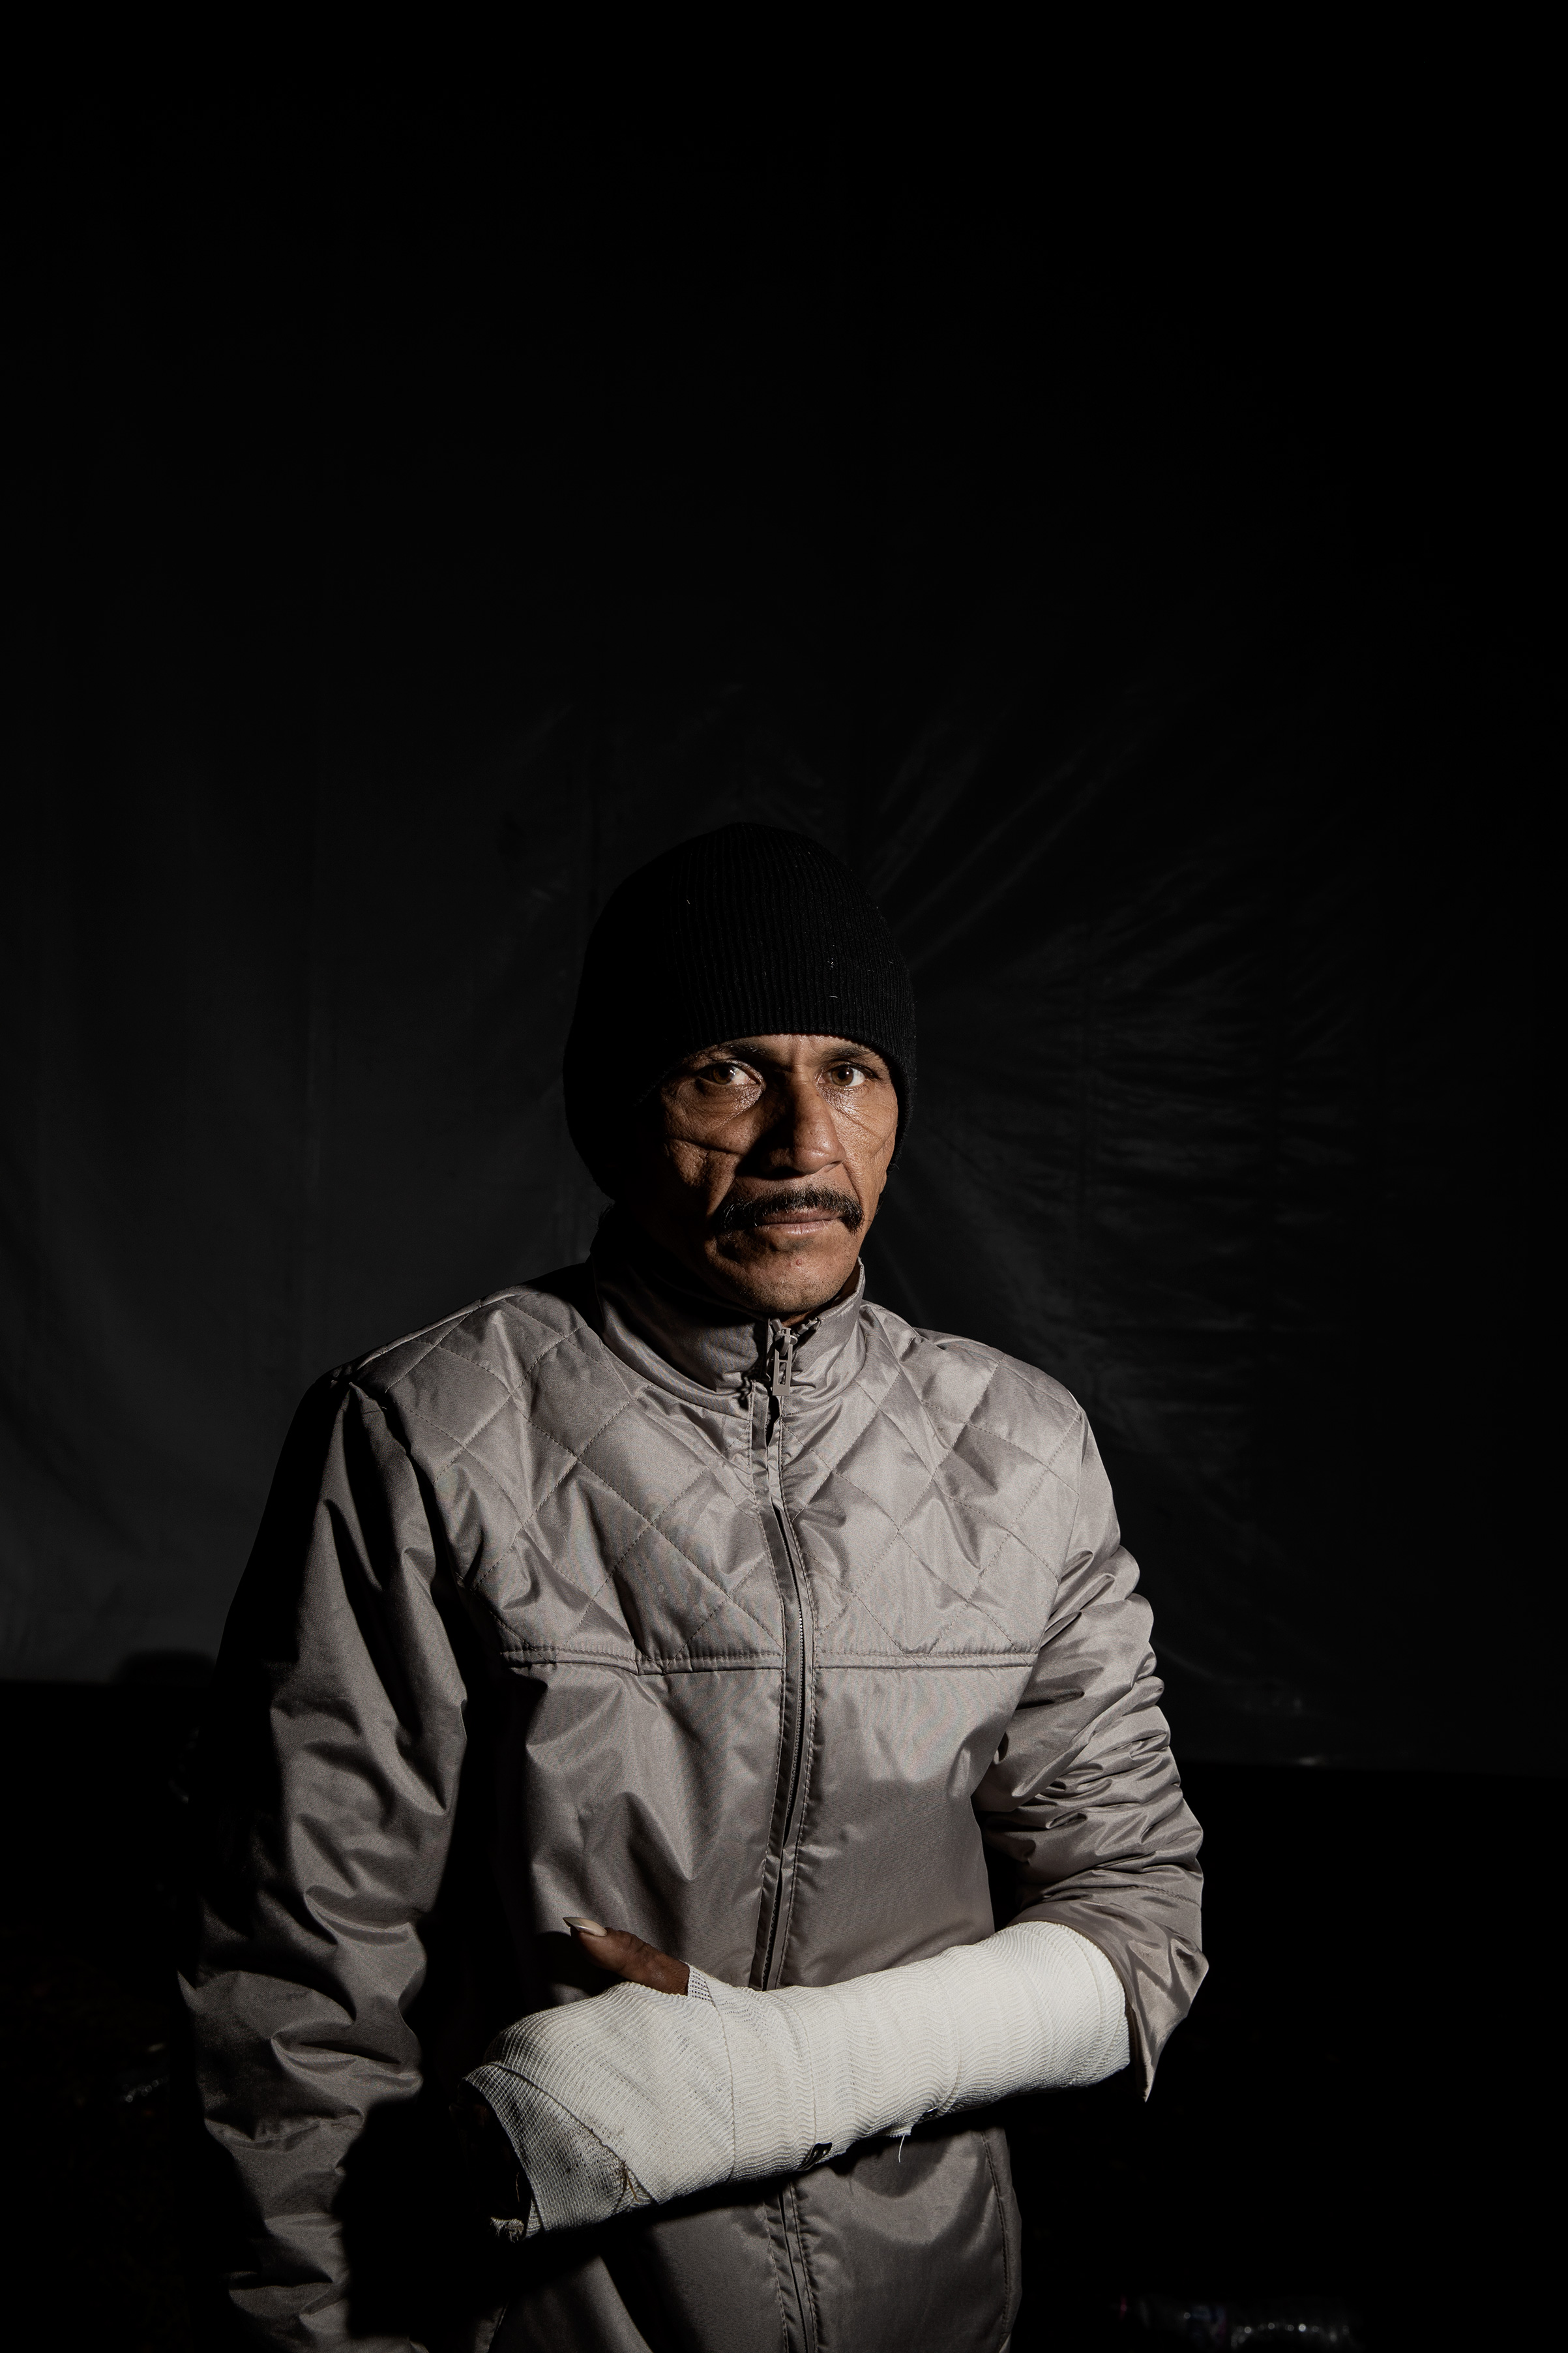 Roberto Vaughan Ordáz, 42, at the Jesus Martinez stadium on Nov. 9, 2018. Ordáz says he first tried to migrate to the US in 2015. When he arrived in Chiapas, he was kidnapped by a gang, shot eight times, cut up with a machete and left for dead. The violence remains in the scars on his face. He decided to travel with the migrant caravan for safety. (Jerome Sessini—Magnum Photos for TIME)